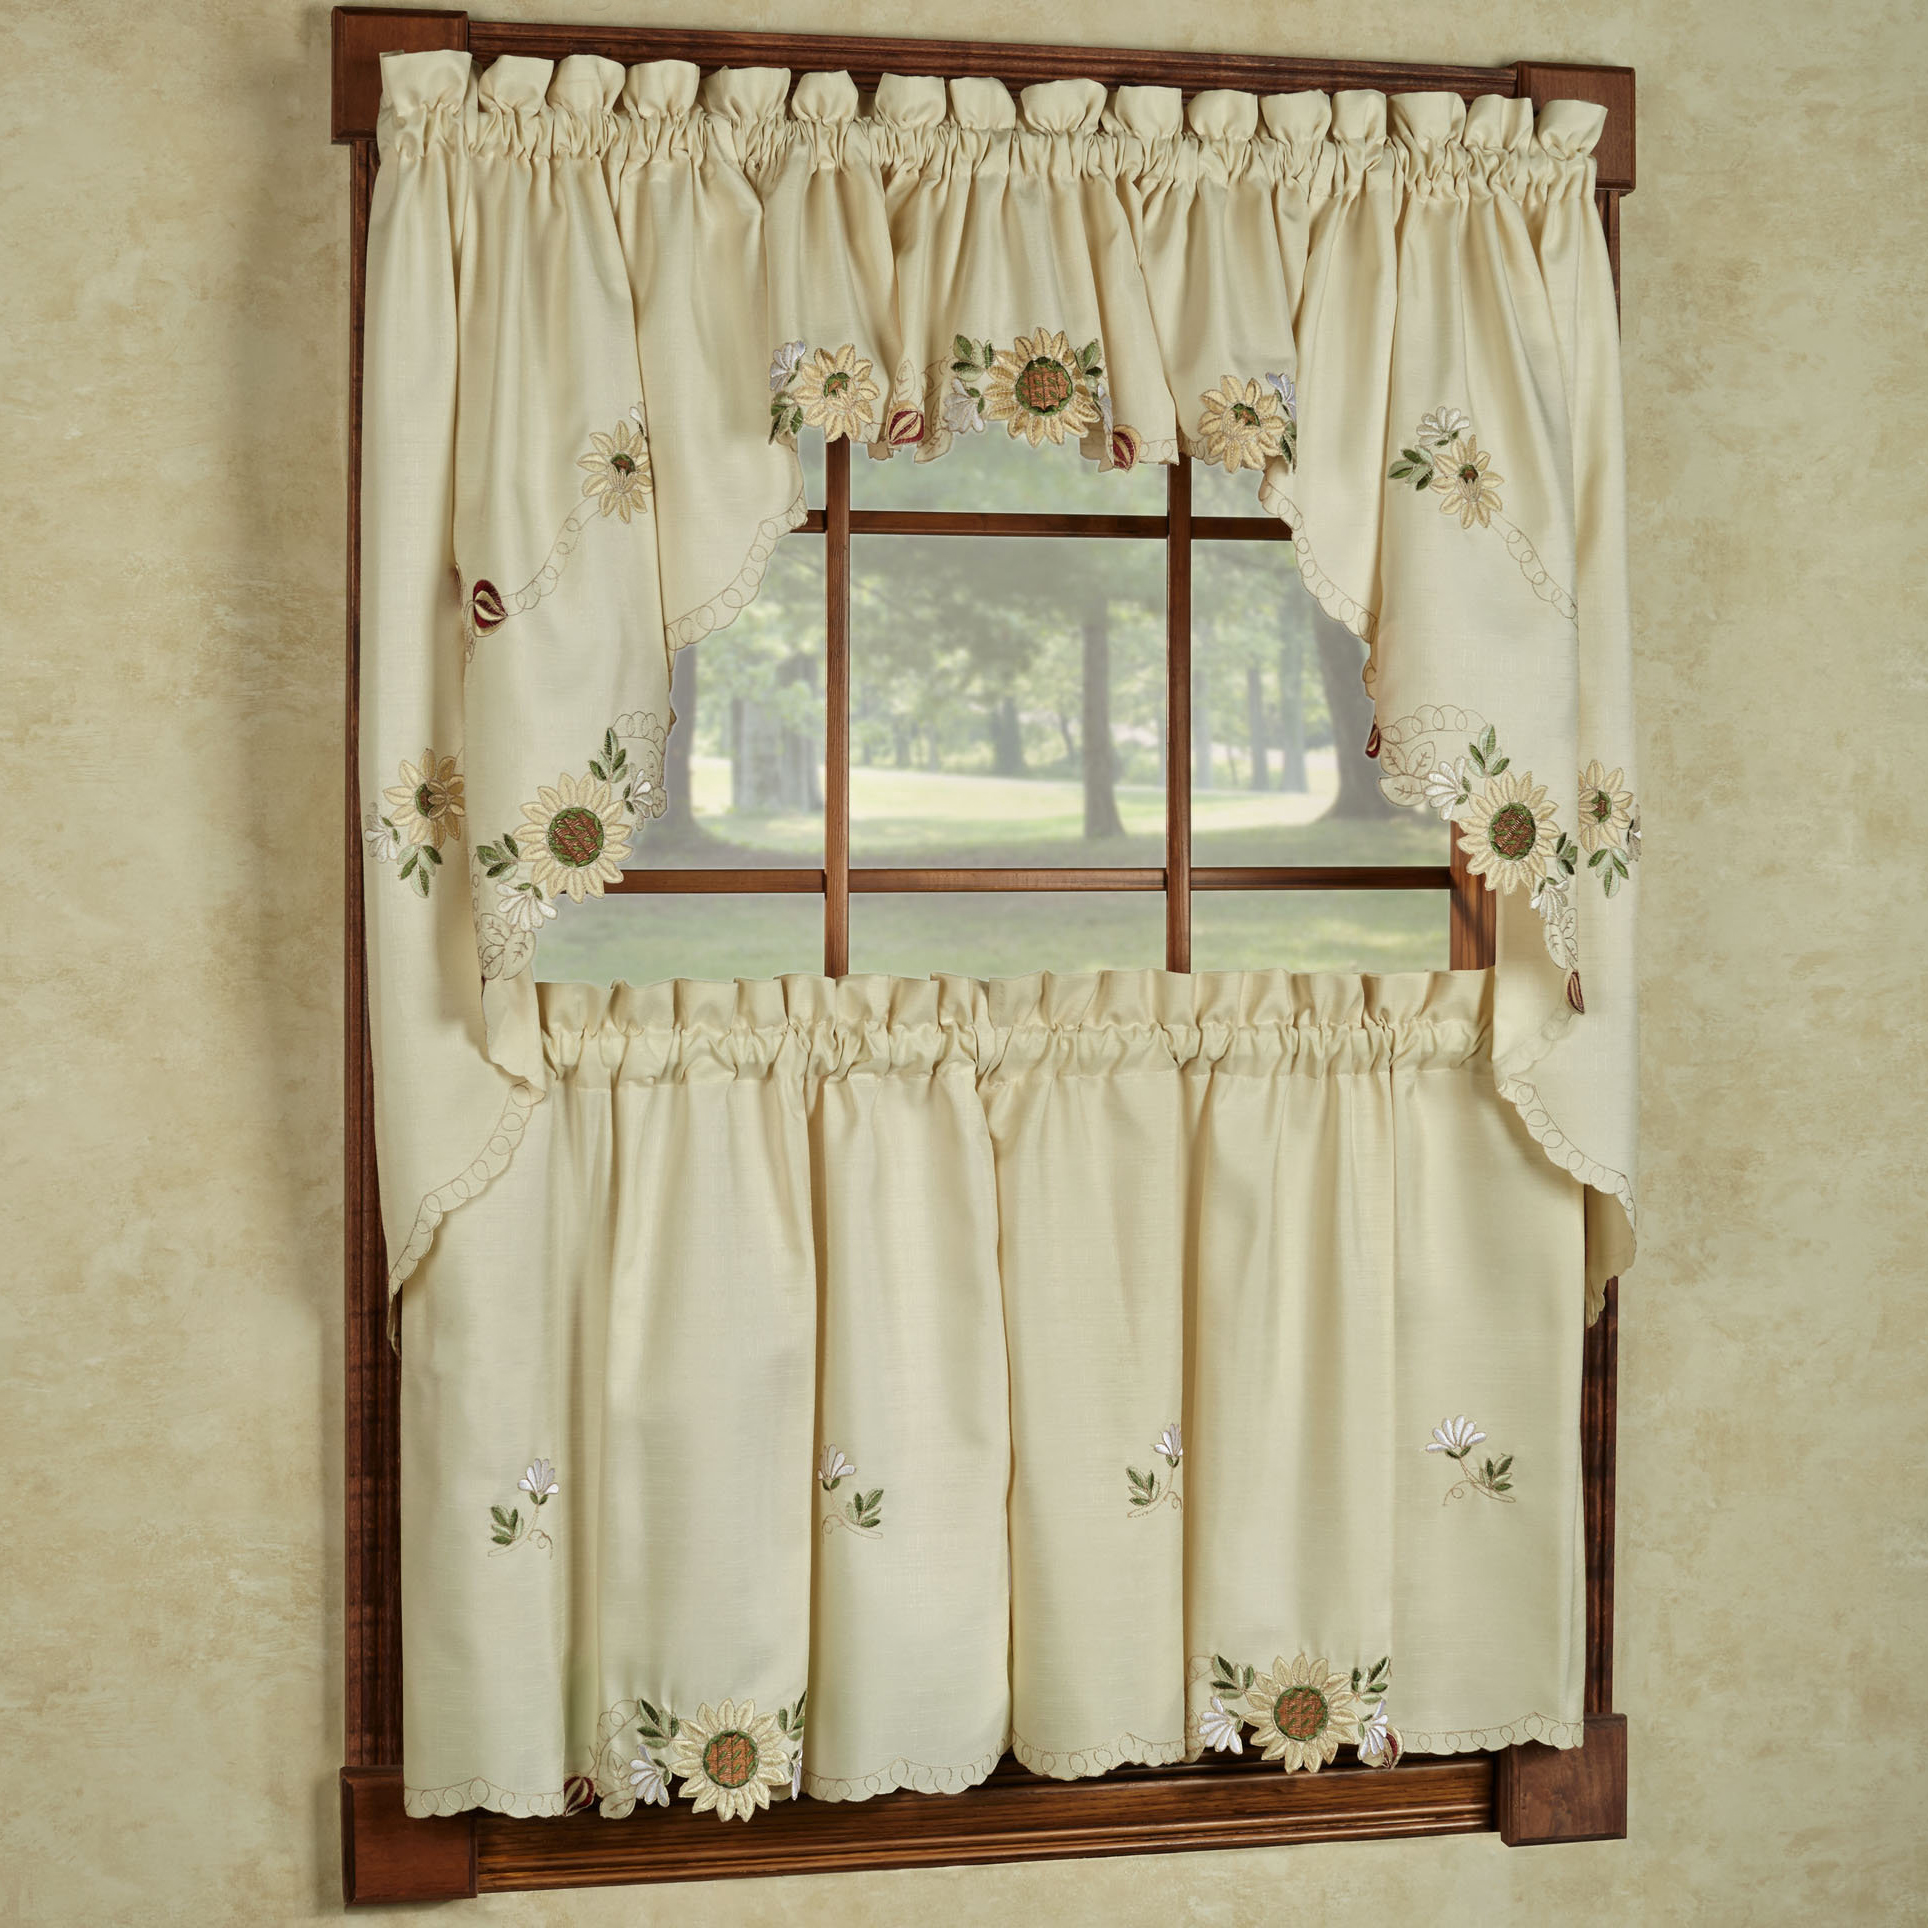 Sunflower Cream Embroidered Kitchen Curtains Tiers Valance Or Swag Ebay